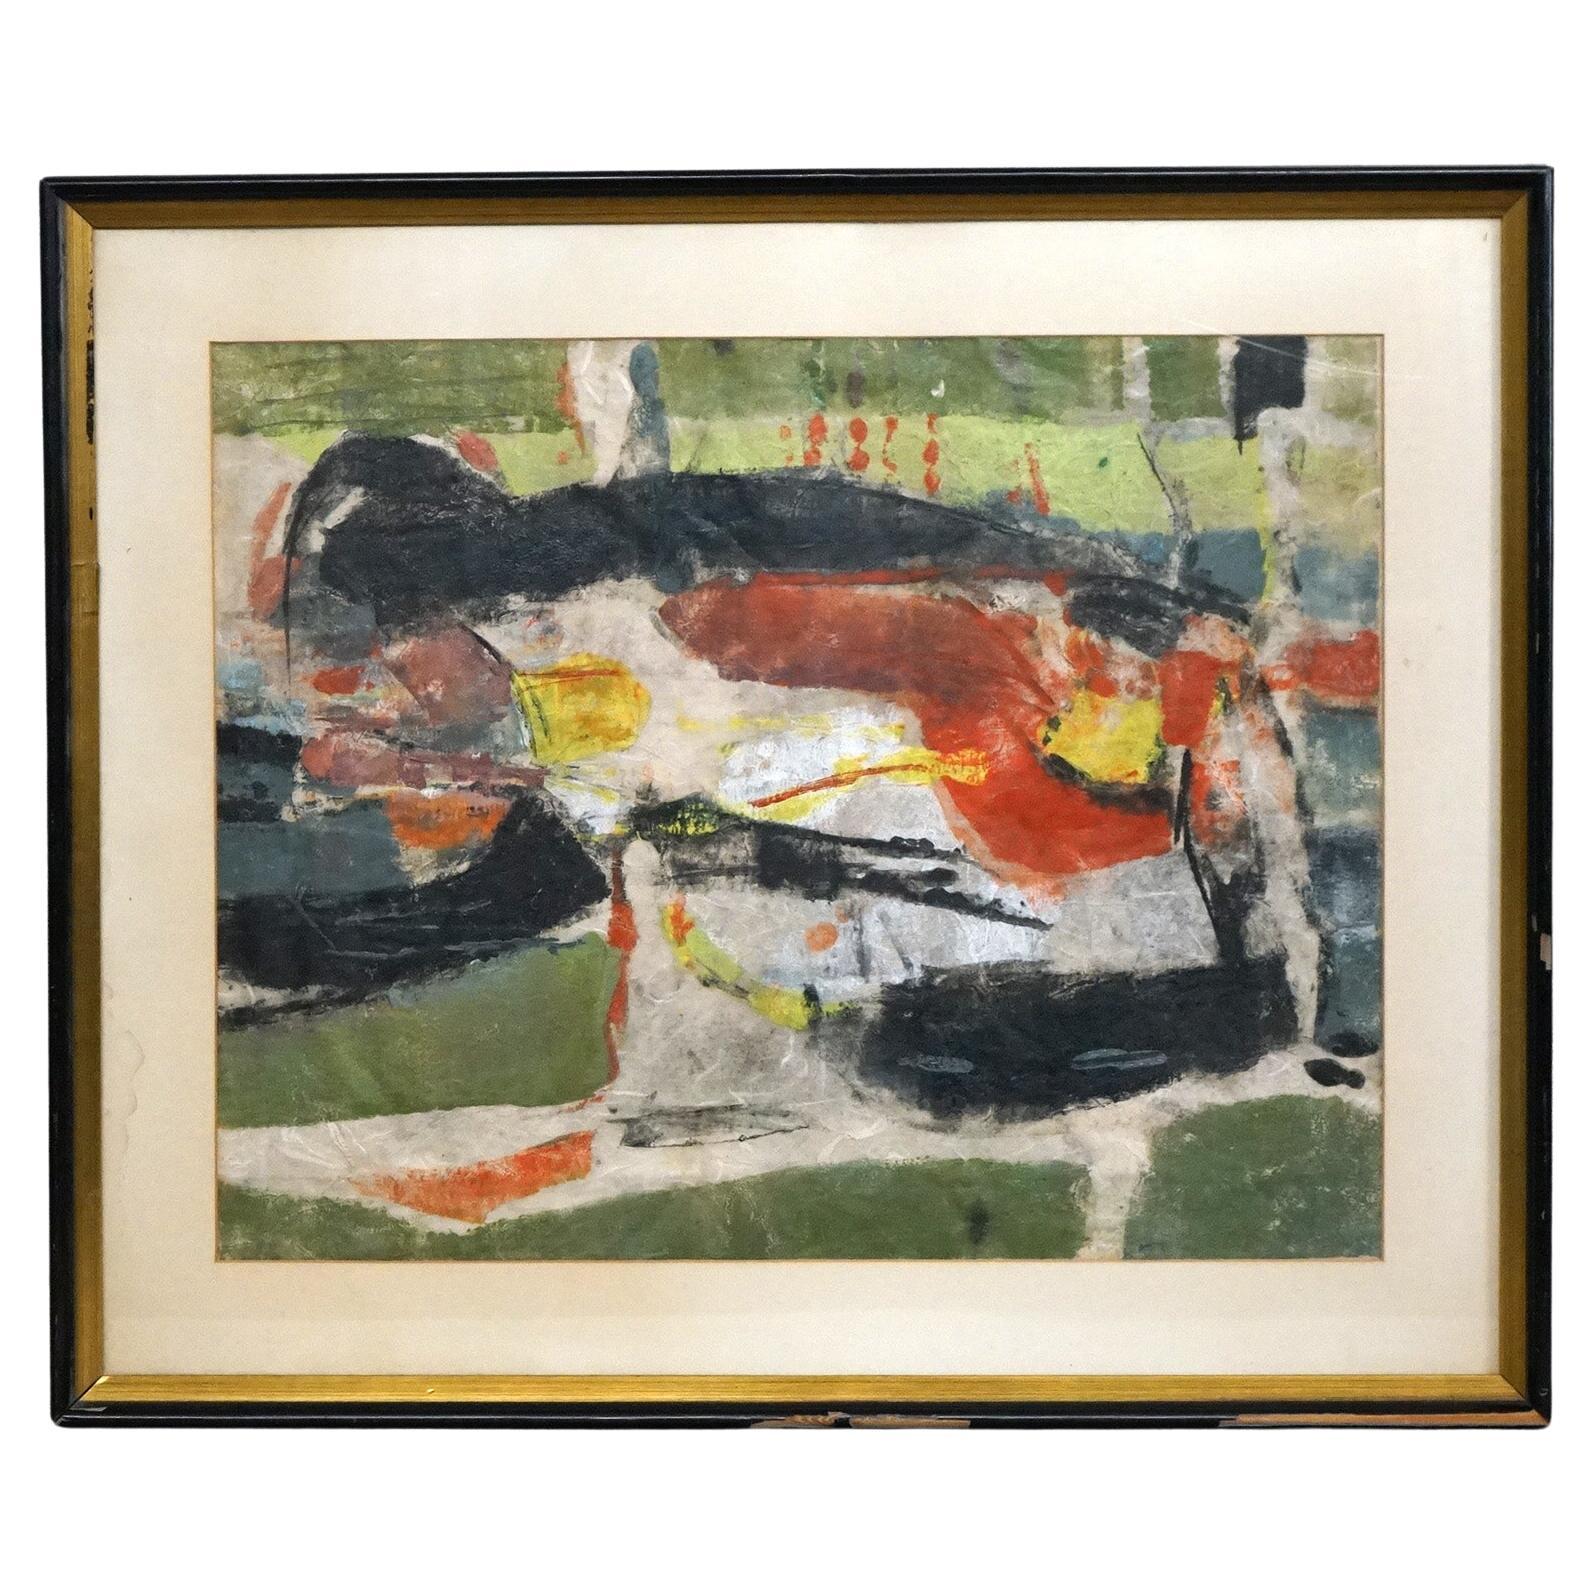 Mid Century Modern Mixed Media Abstract “Bayou” Painting By D. Hoyt, Mid-20thC For Sale